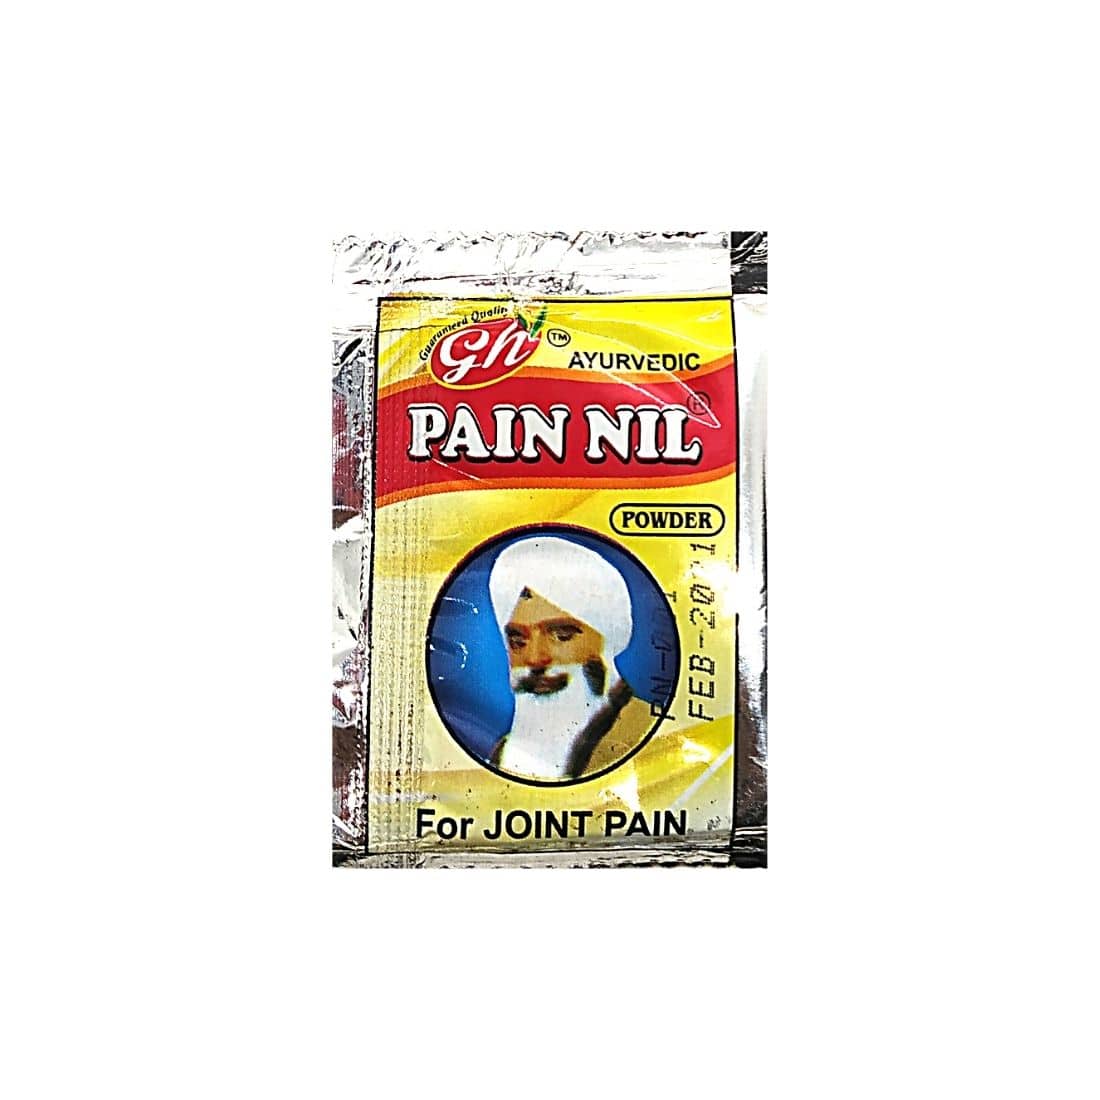 Pain Nil Powder For Joint Pain (pack of 20)Pain Nil Powder For Joint Pain (pack of 20)